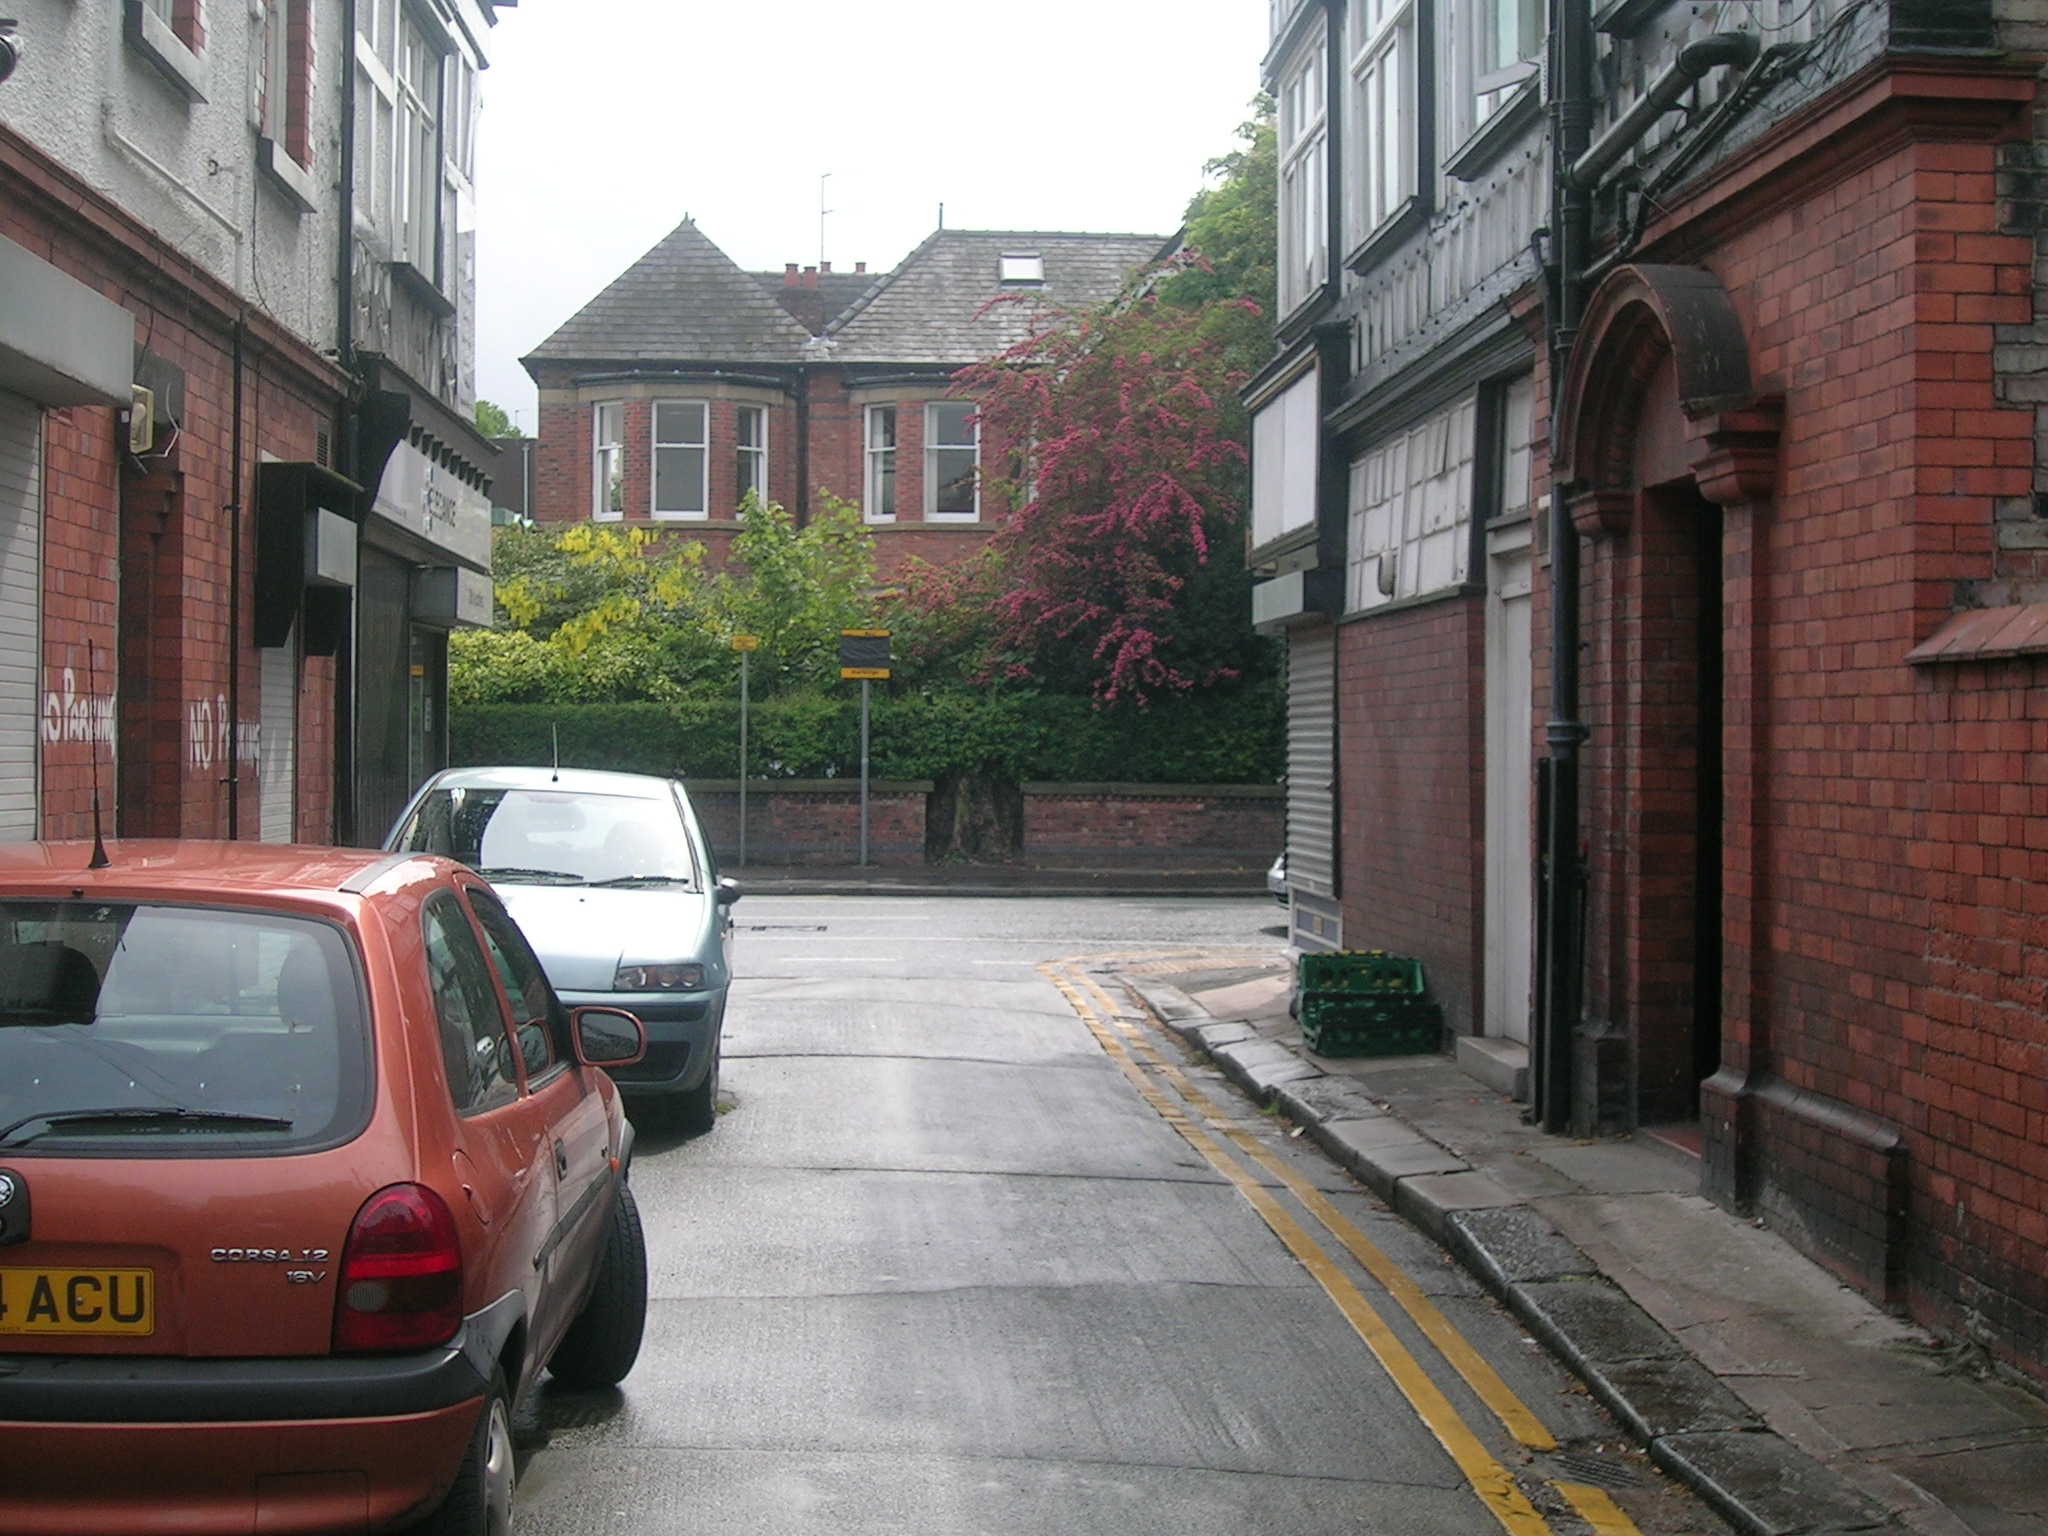 two cars parked in a city street by brick buildings